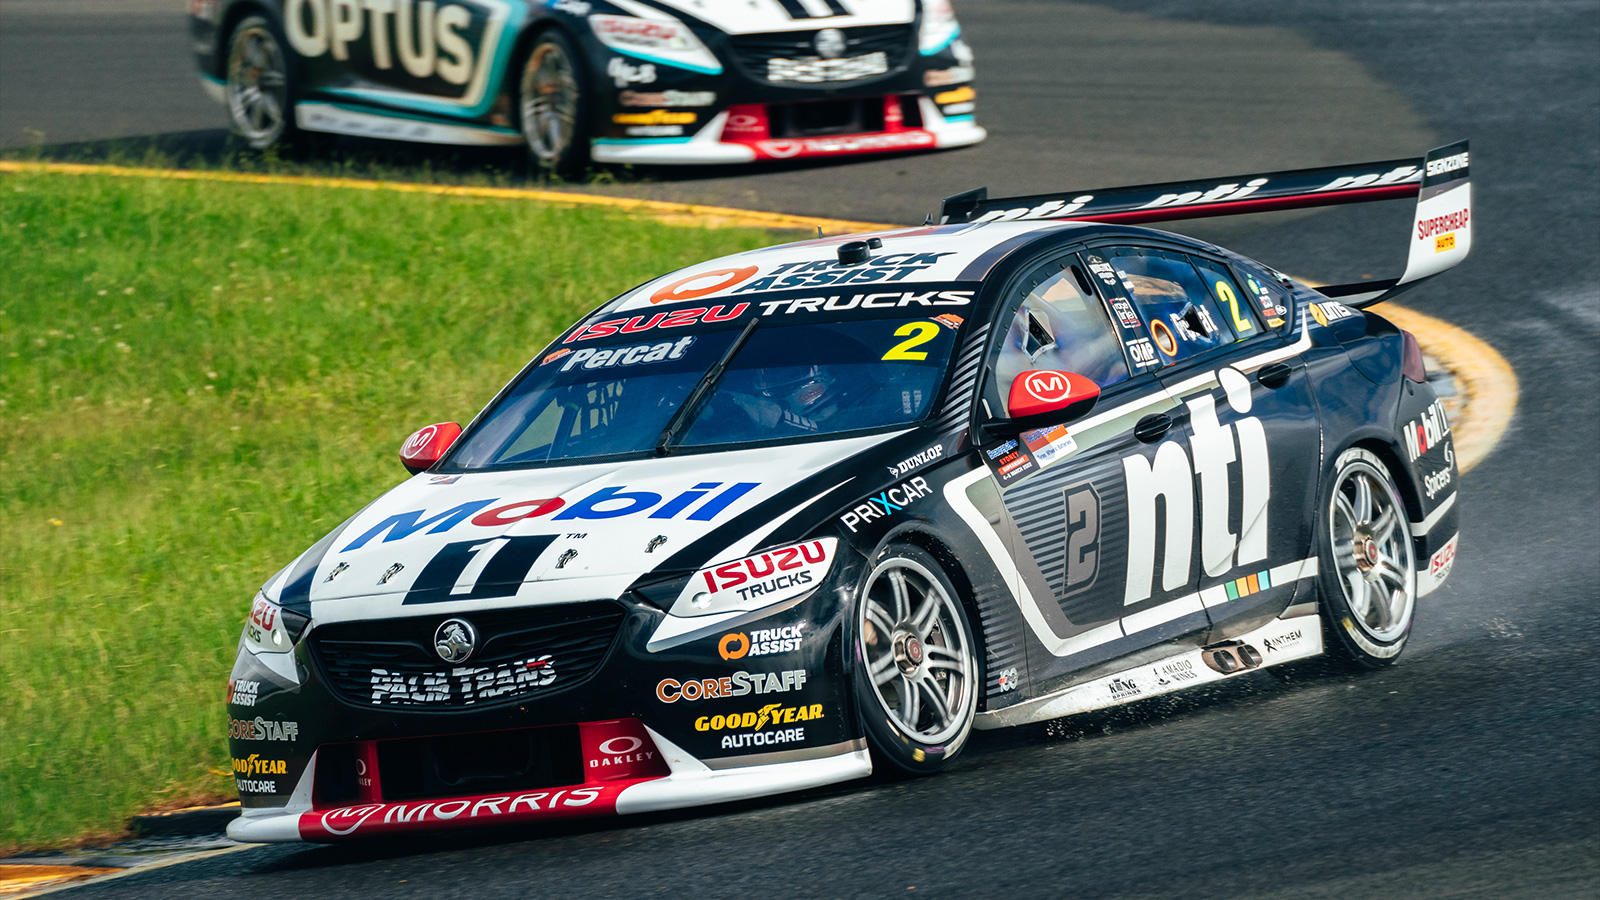 Nick Percat and Chaz Mostert in qualifying in Sydney.